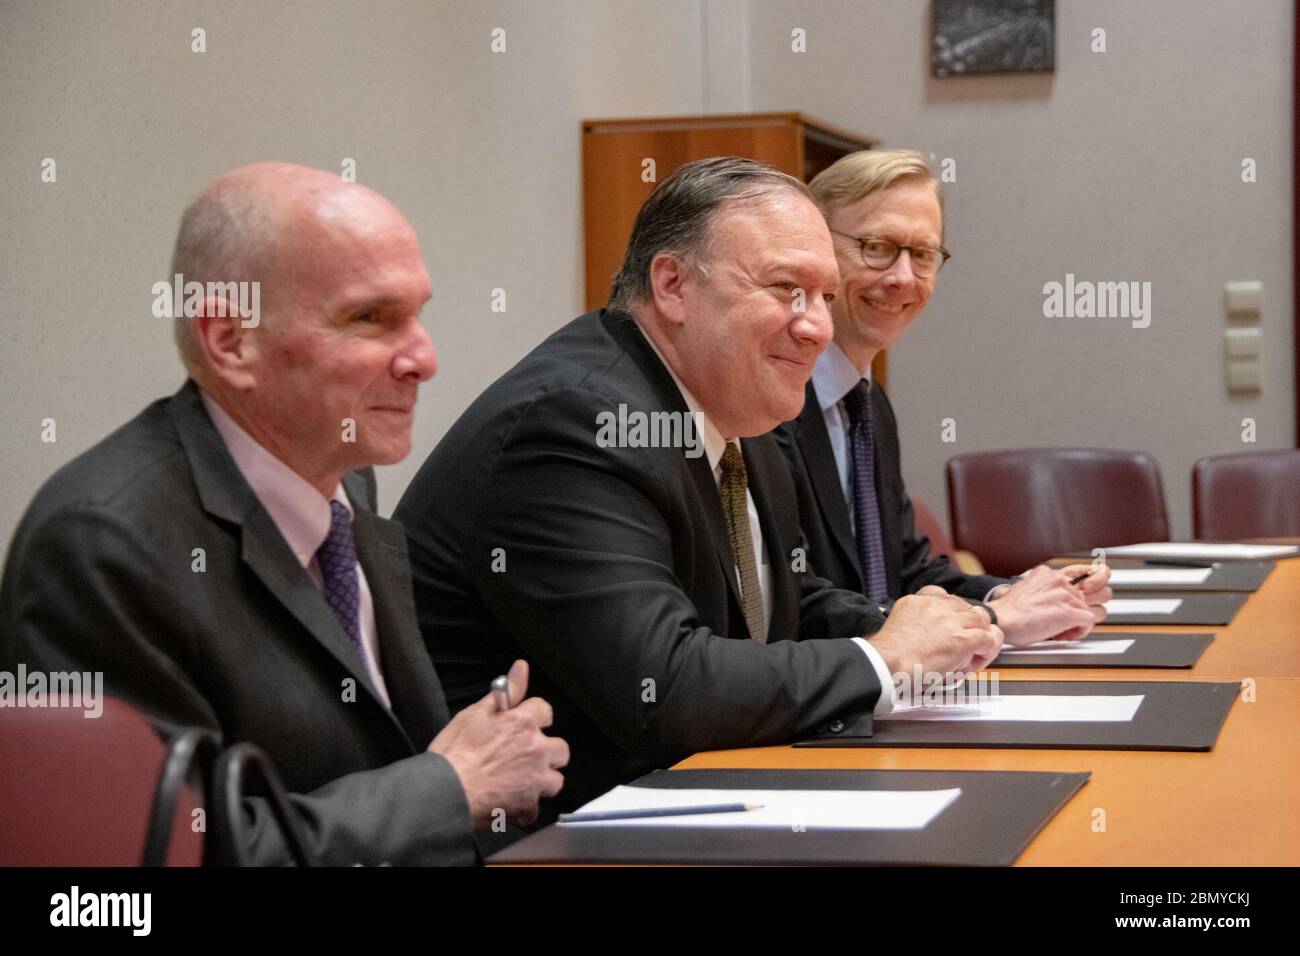 Secretary Pompeo Meets With French Foreign Minister Jean-Yves Le Drian U.S. Secretary of State Michael R. Pompeo meets with French Foreign Minister Jean-Yves Le Drian at The Justus Lipsius EU Council Building in Brussels, Belgium on May 13, 2019. Stock Photo